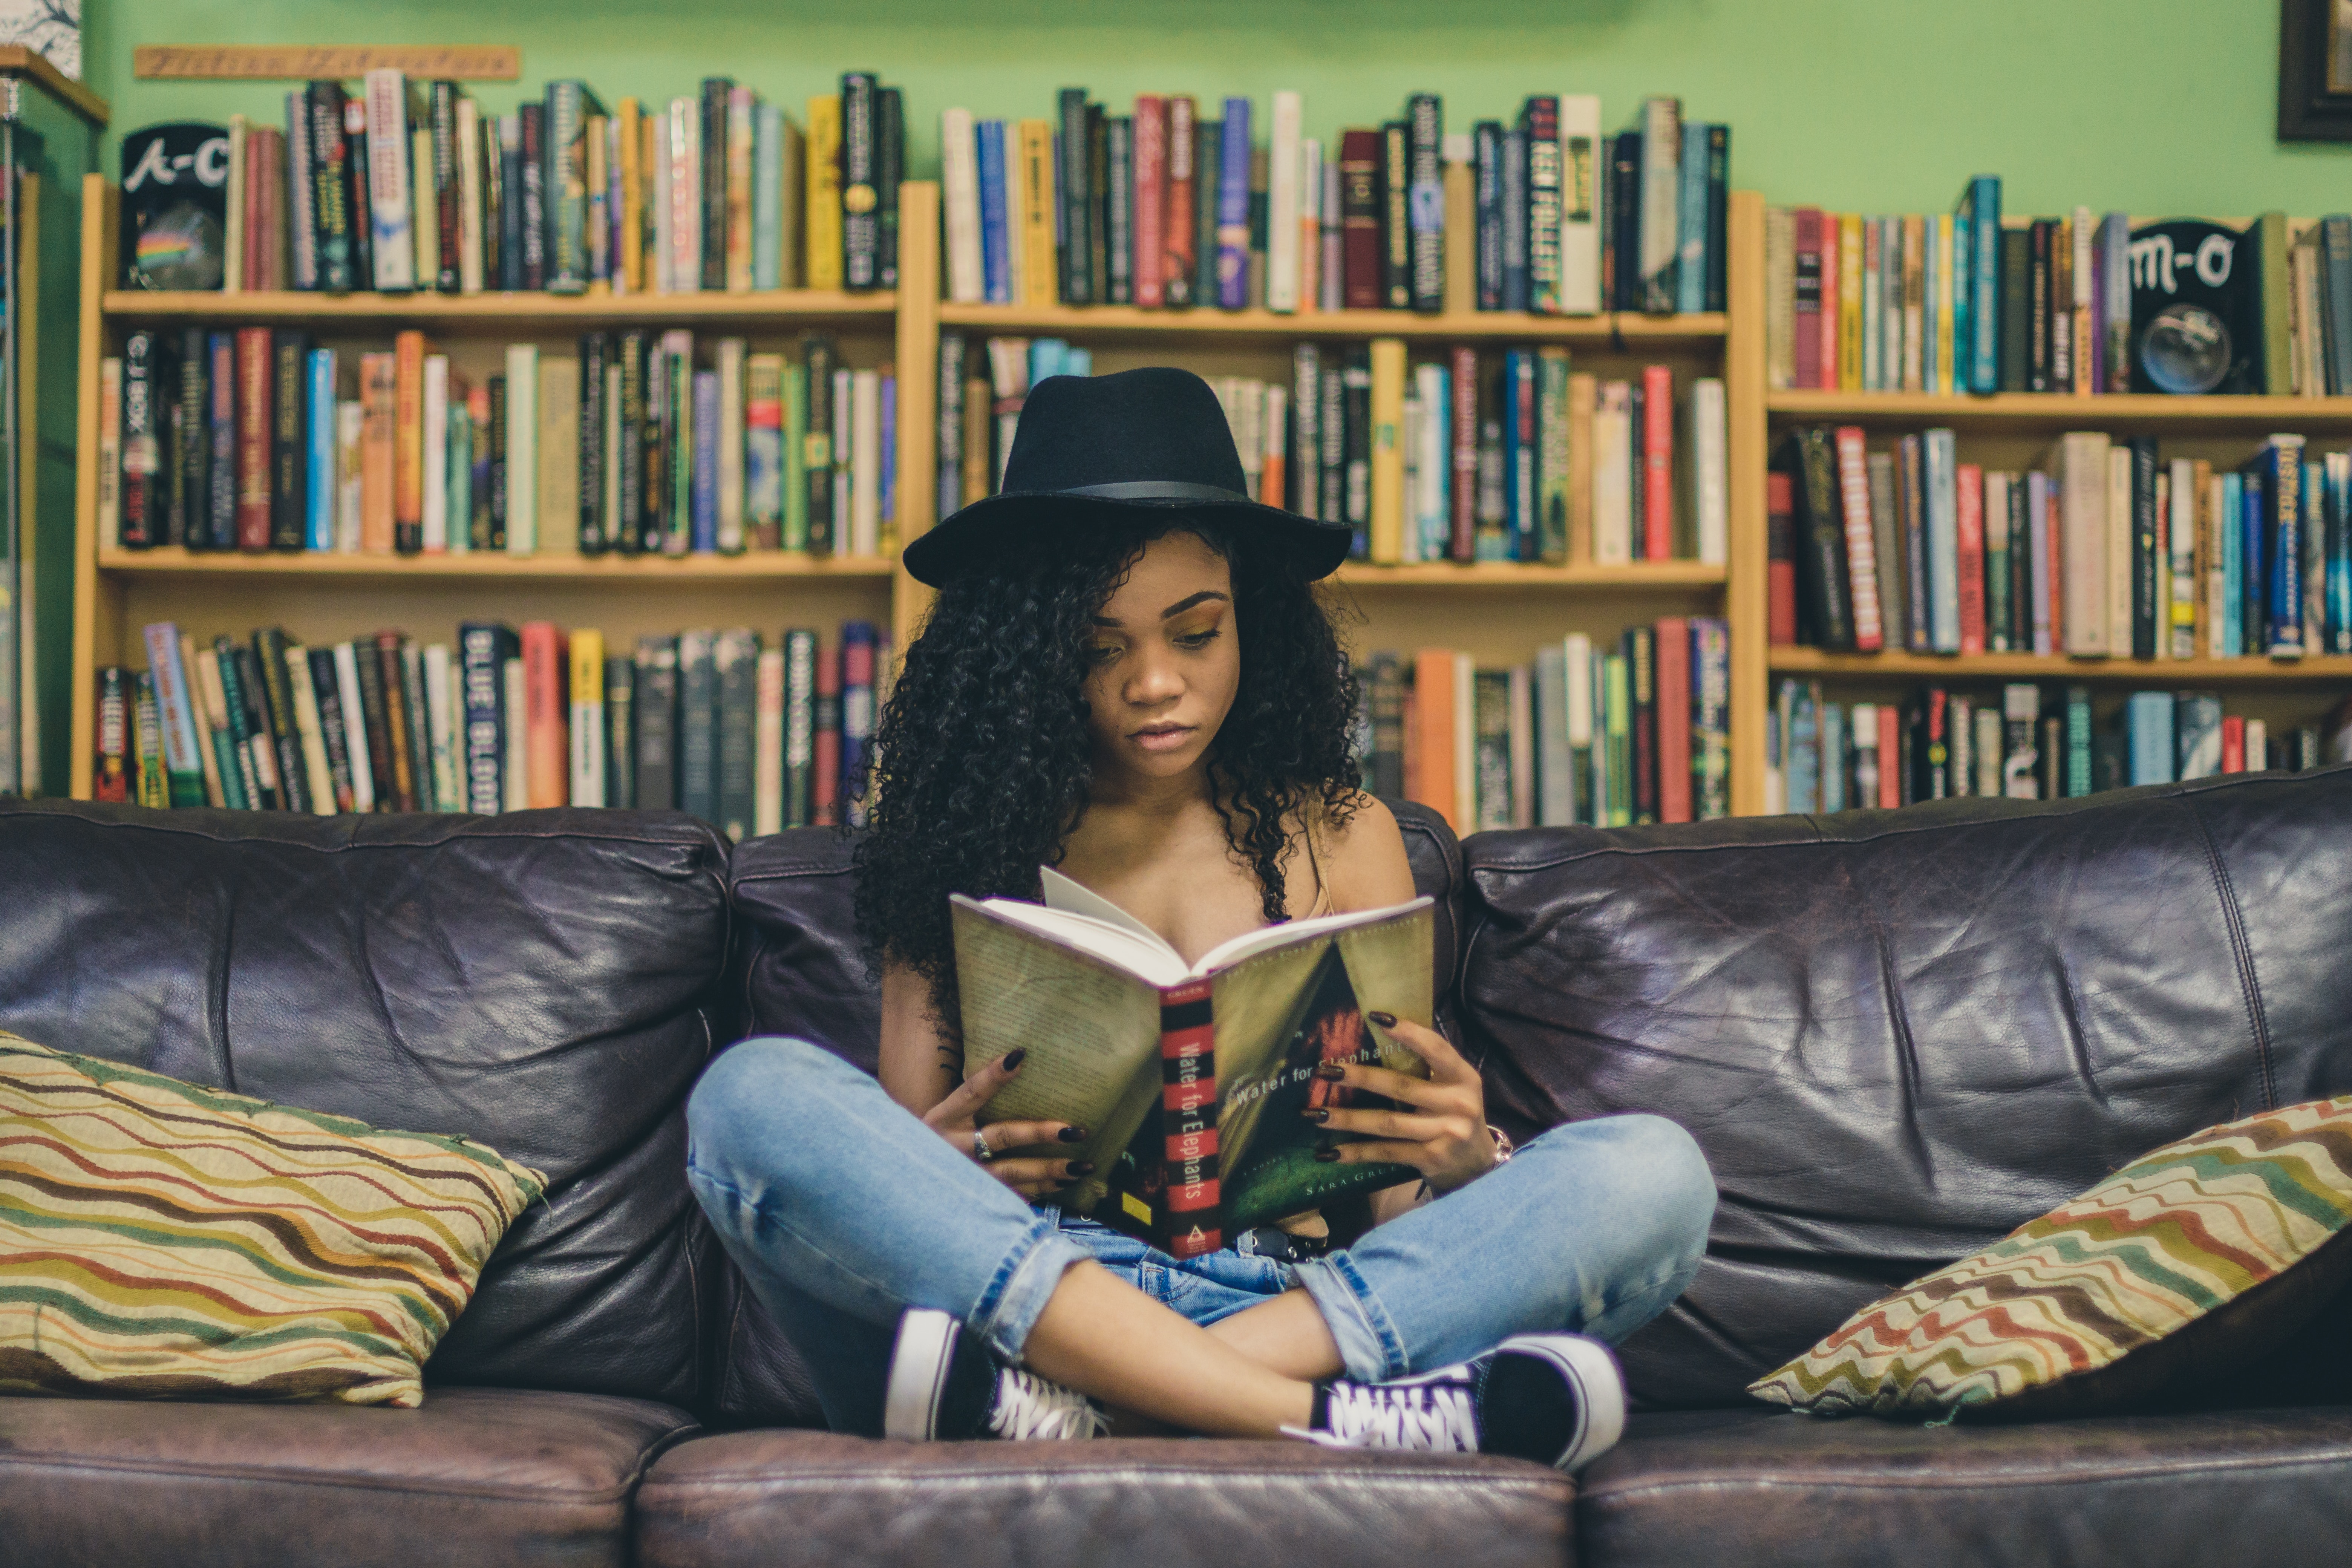 A girl reads a book on a couch.